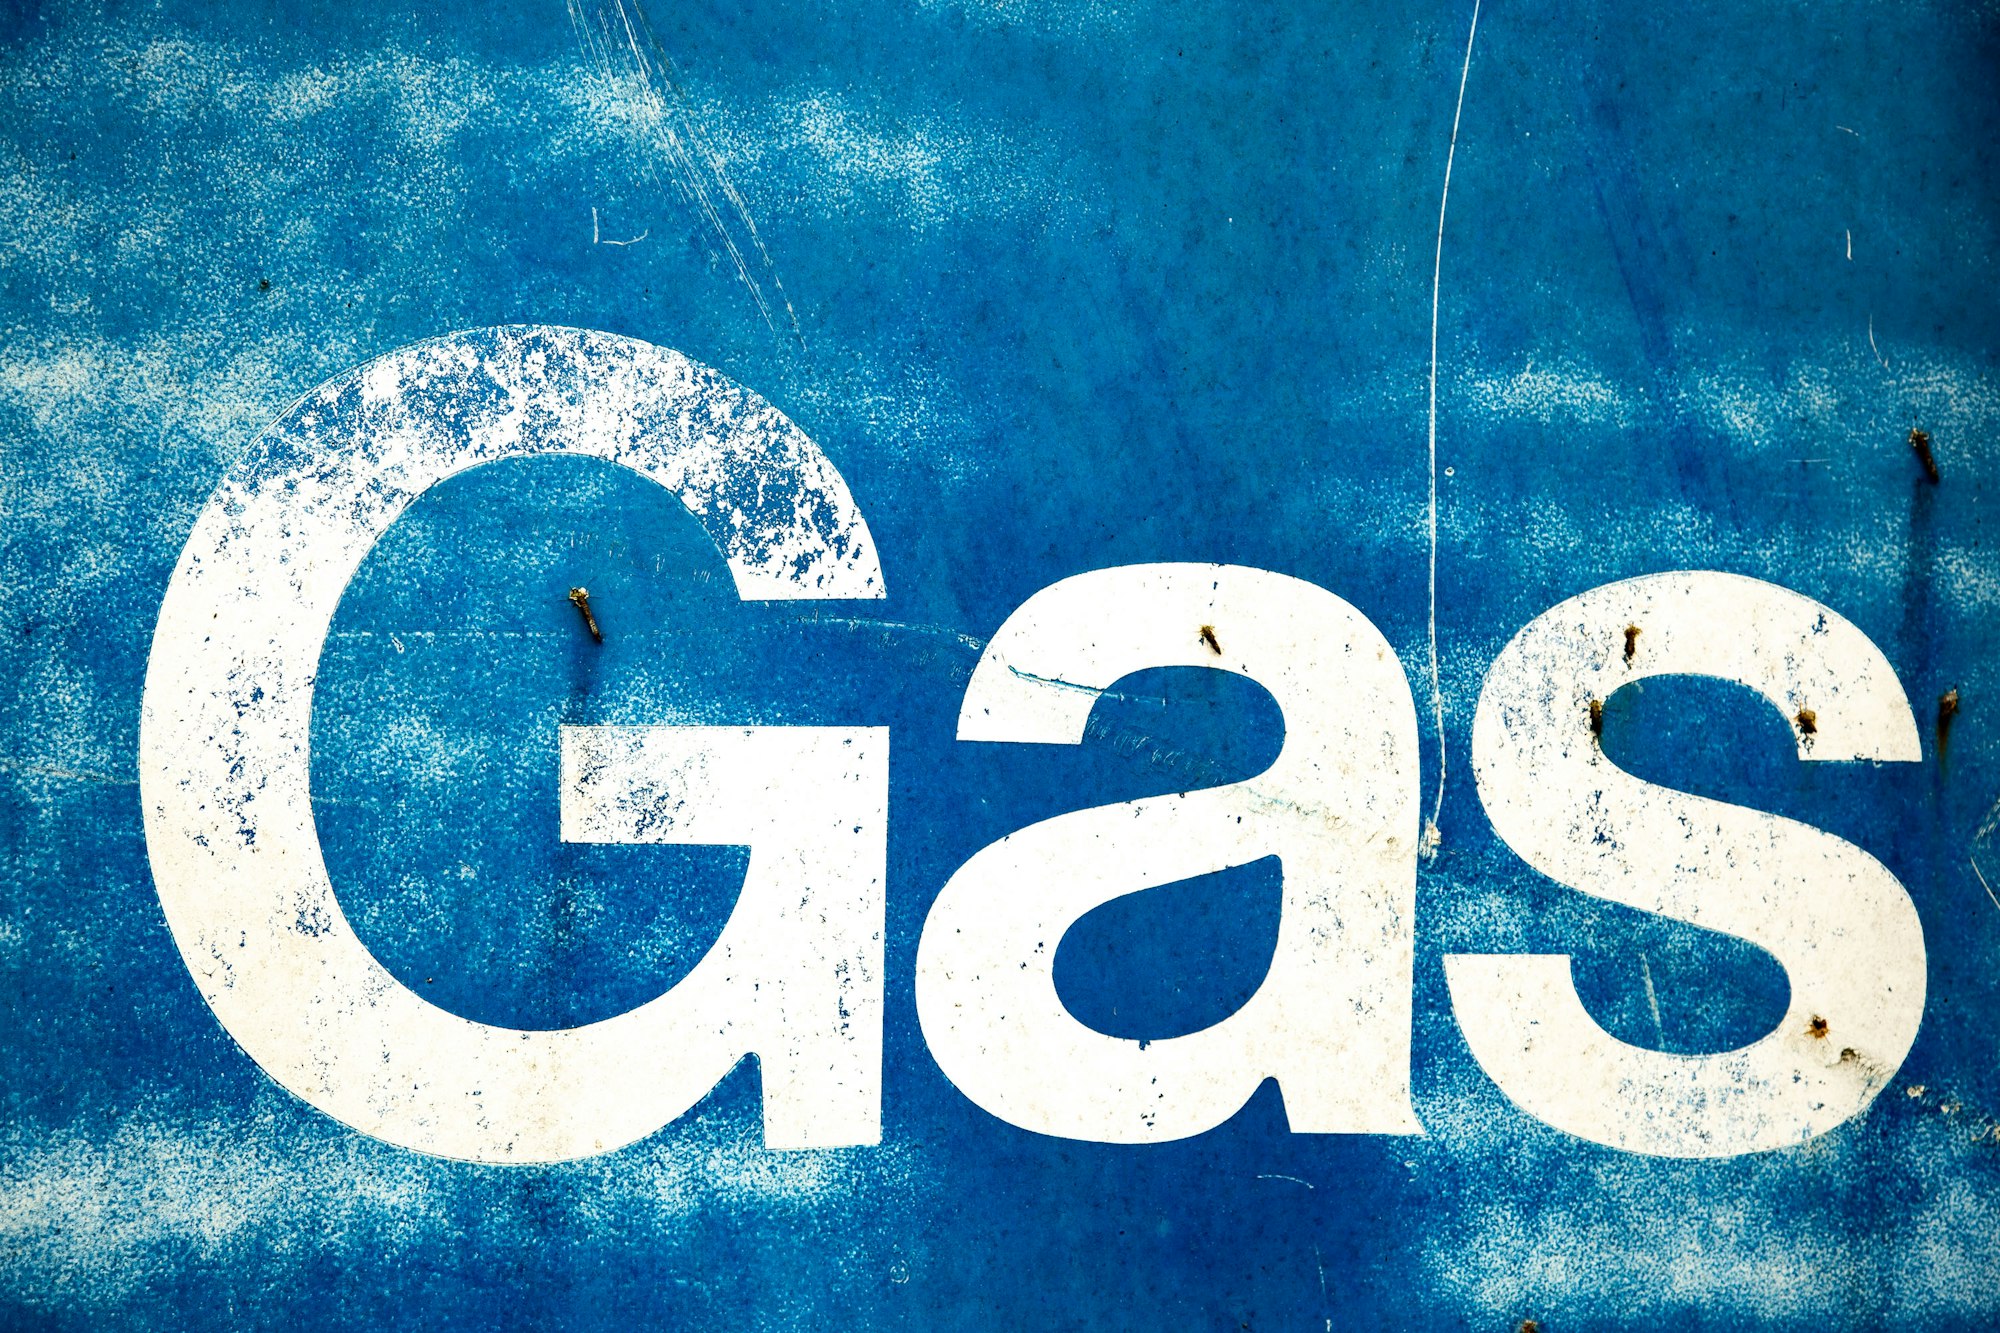 sign on the side of an old British gas trailer. 
It reminds me of the song Jumpin' Jack Flash, by the Rolling Stones